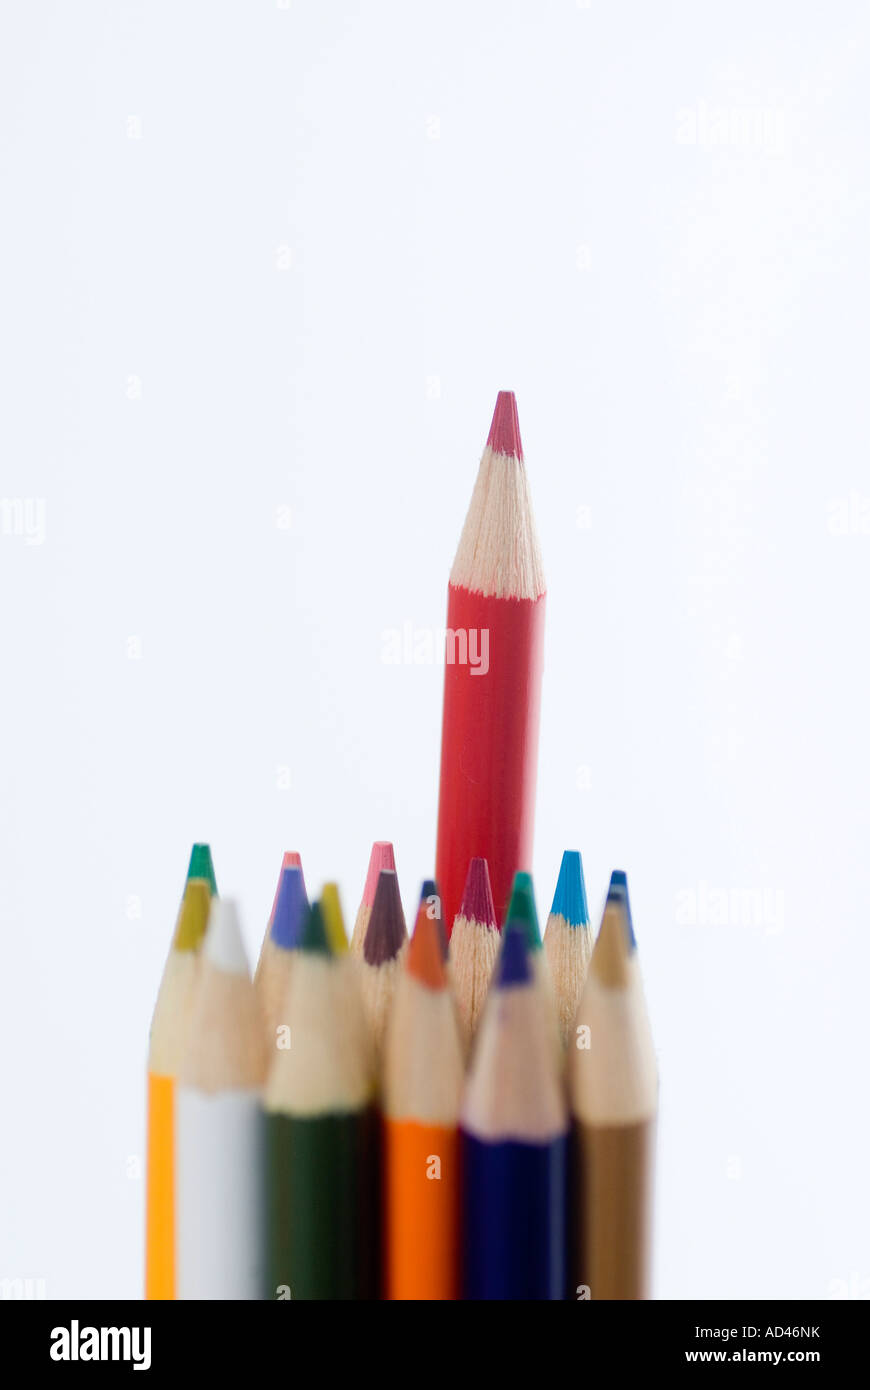 Red pencil standing out from the crowd Stock Photo